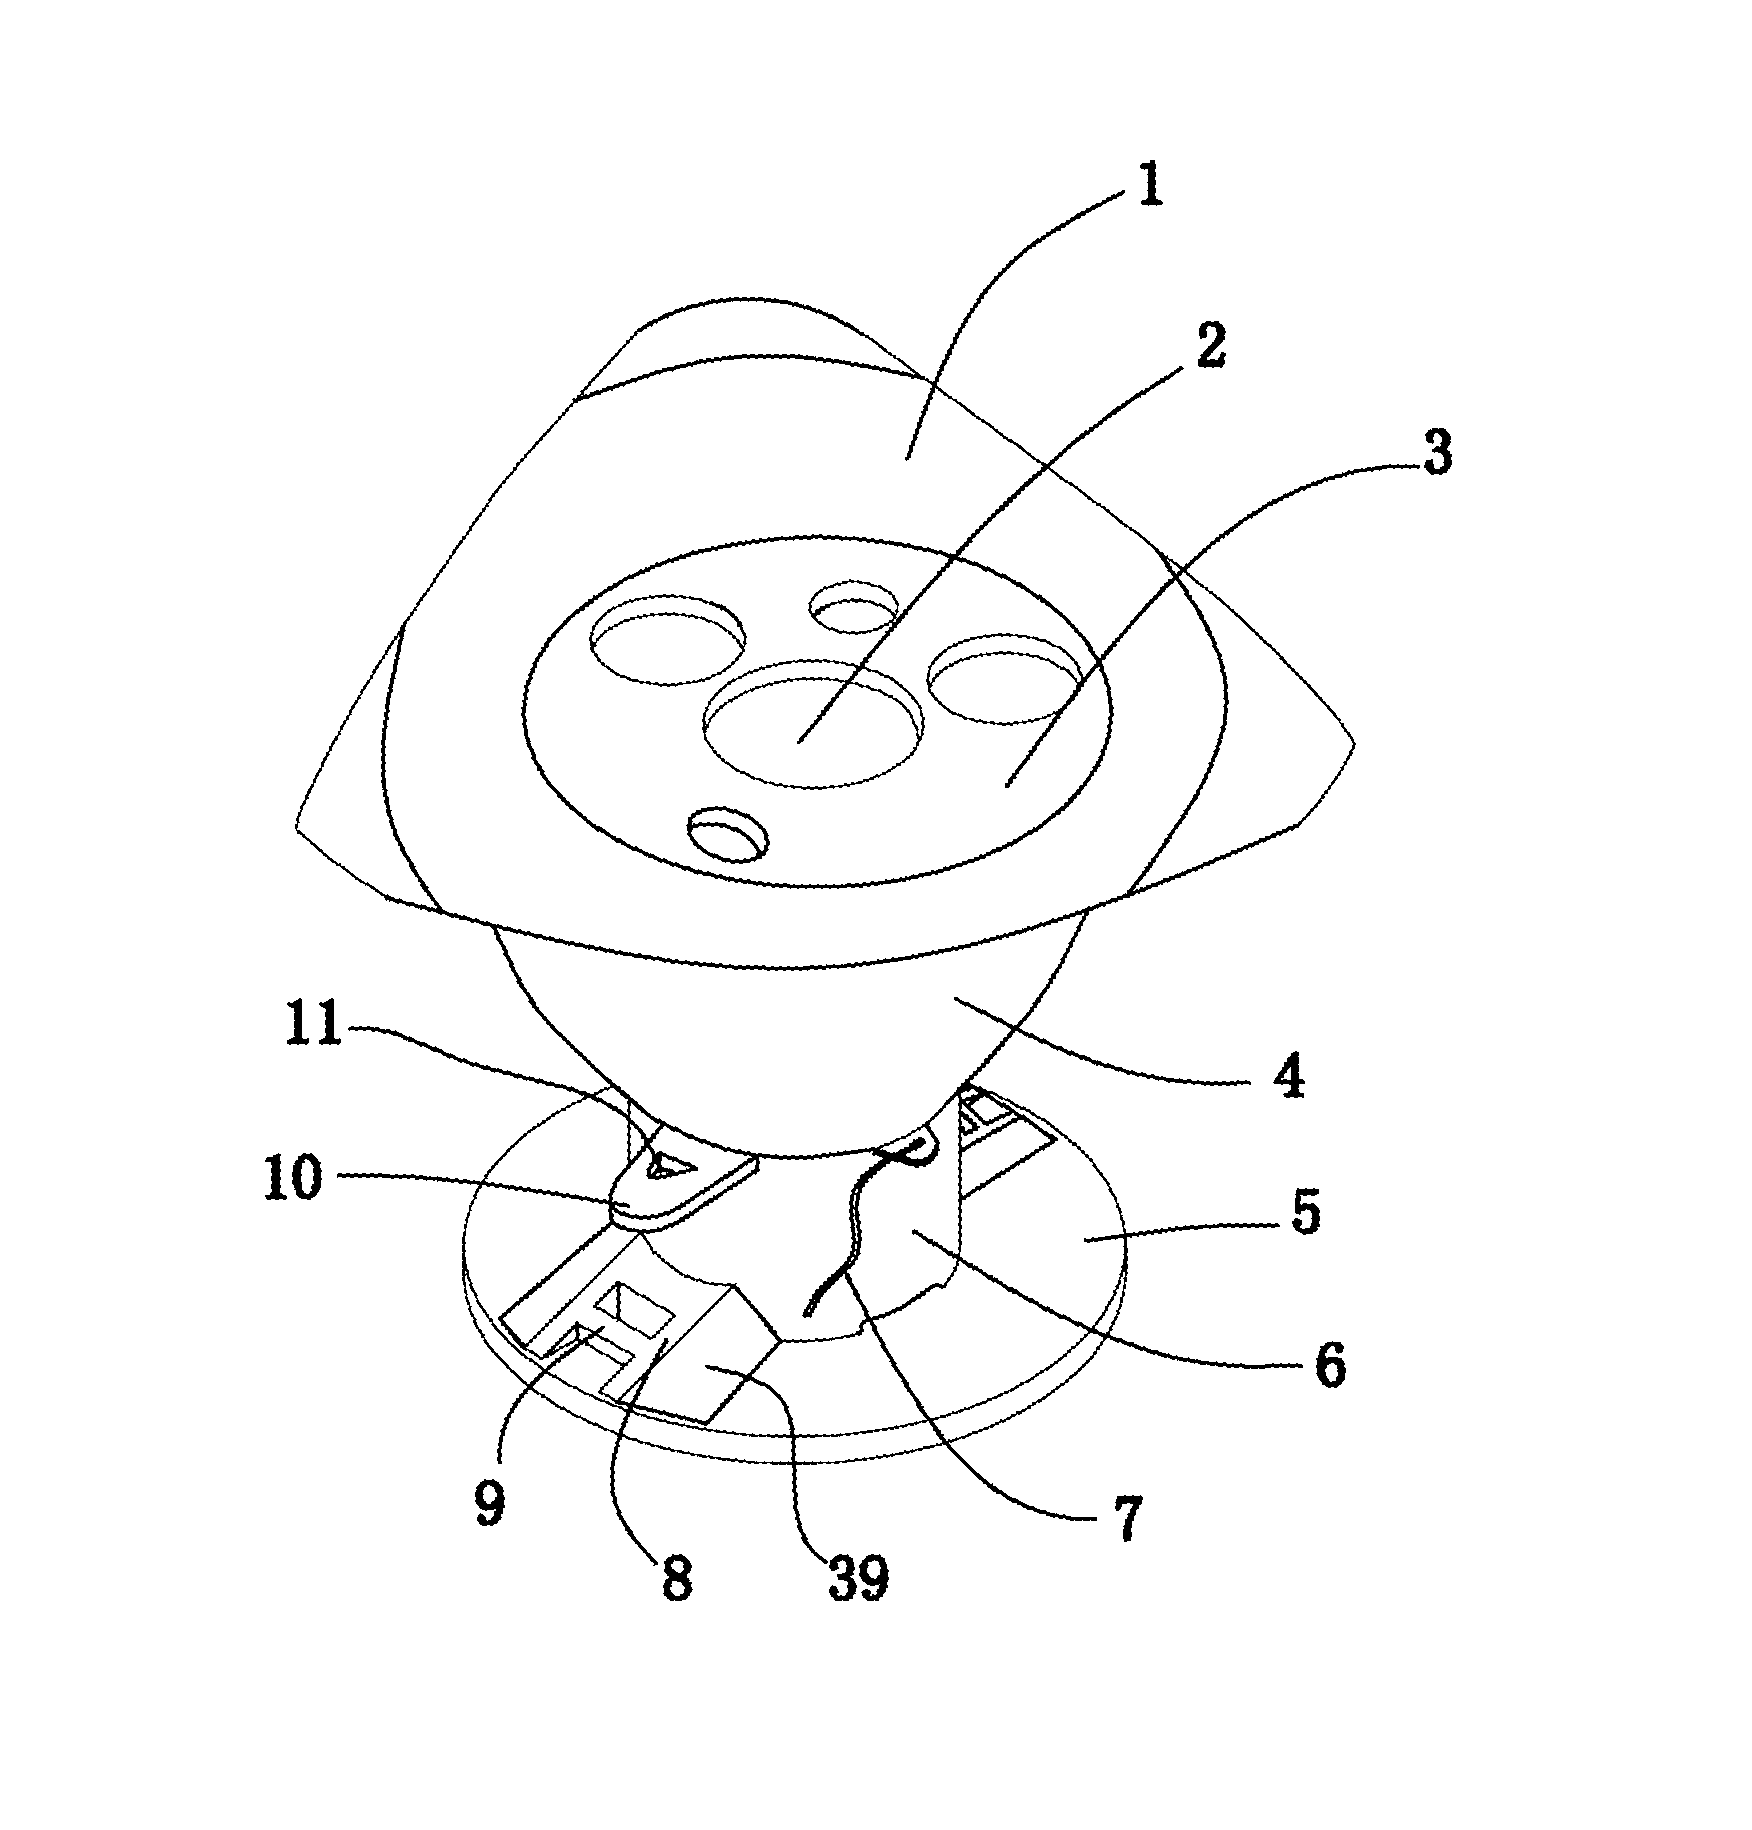 Device for Sealing Single Incision from Laparoscopic Surgery